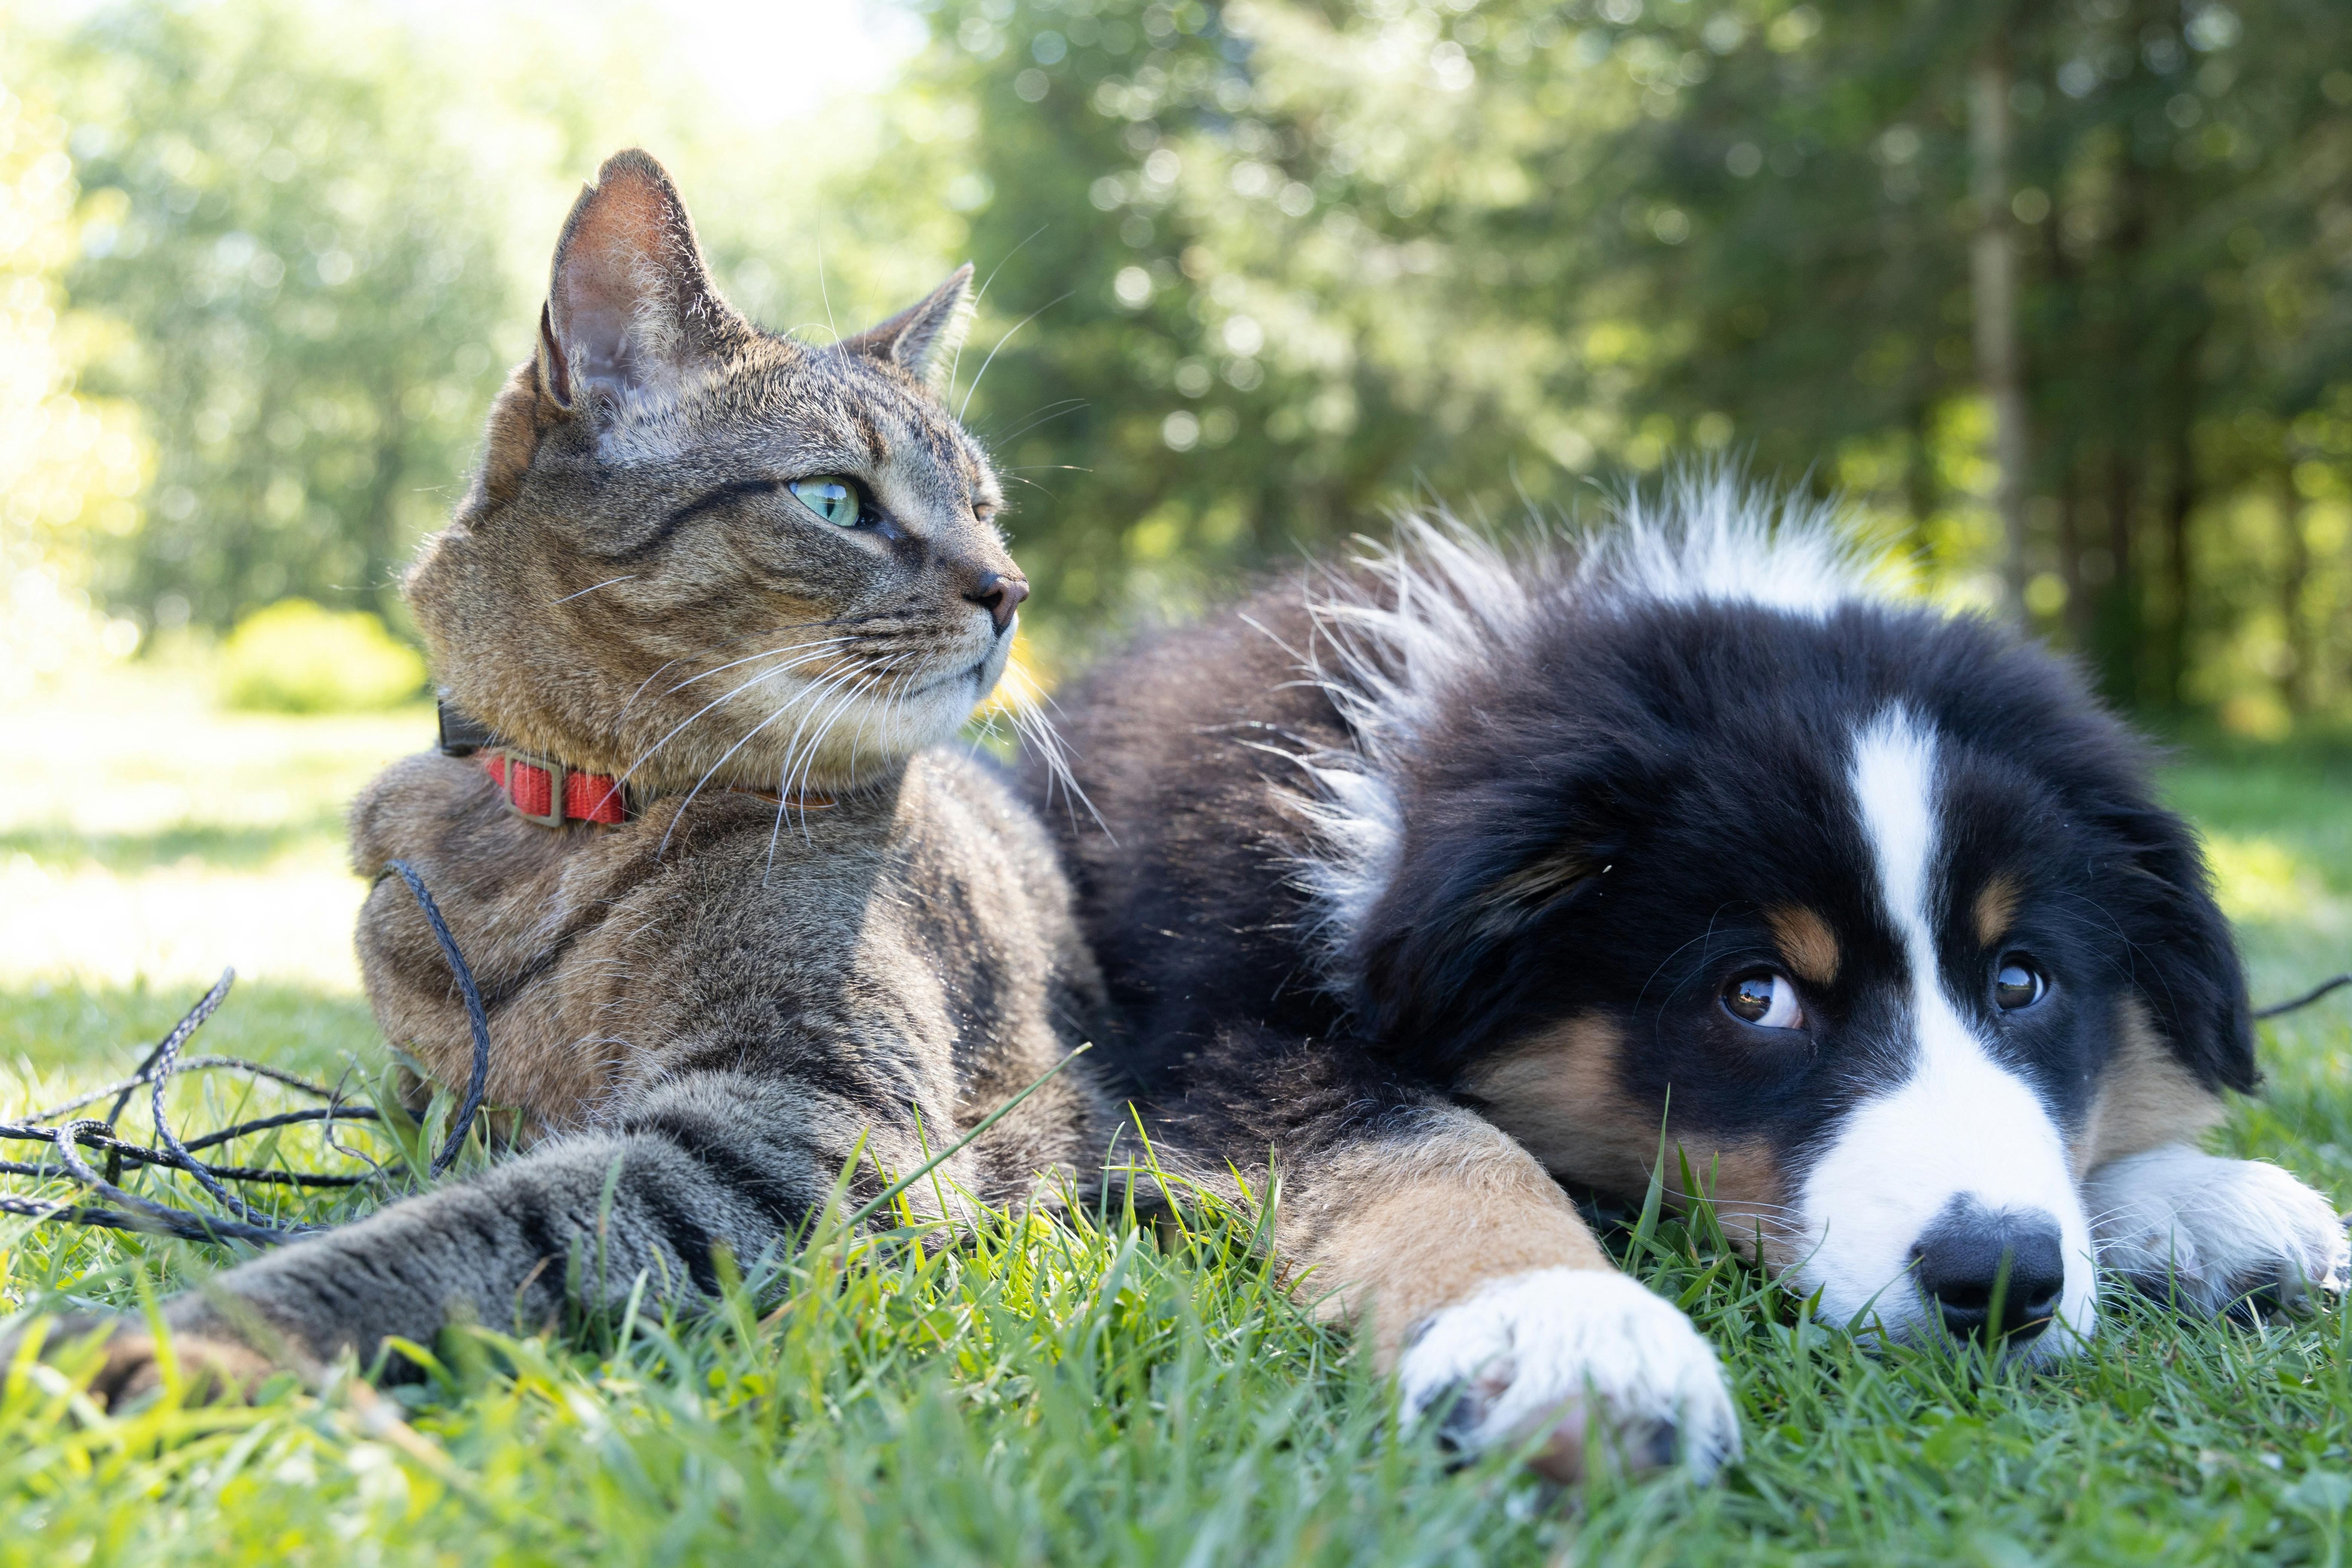 Cat and puppy lying in the grass together.